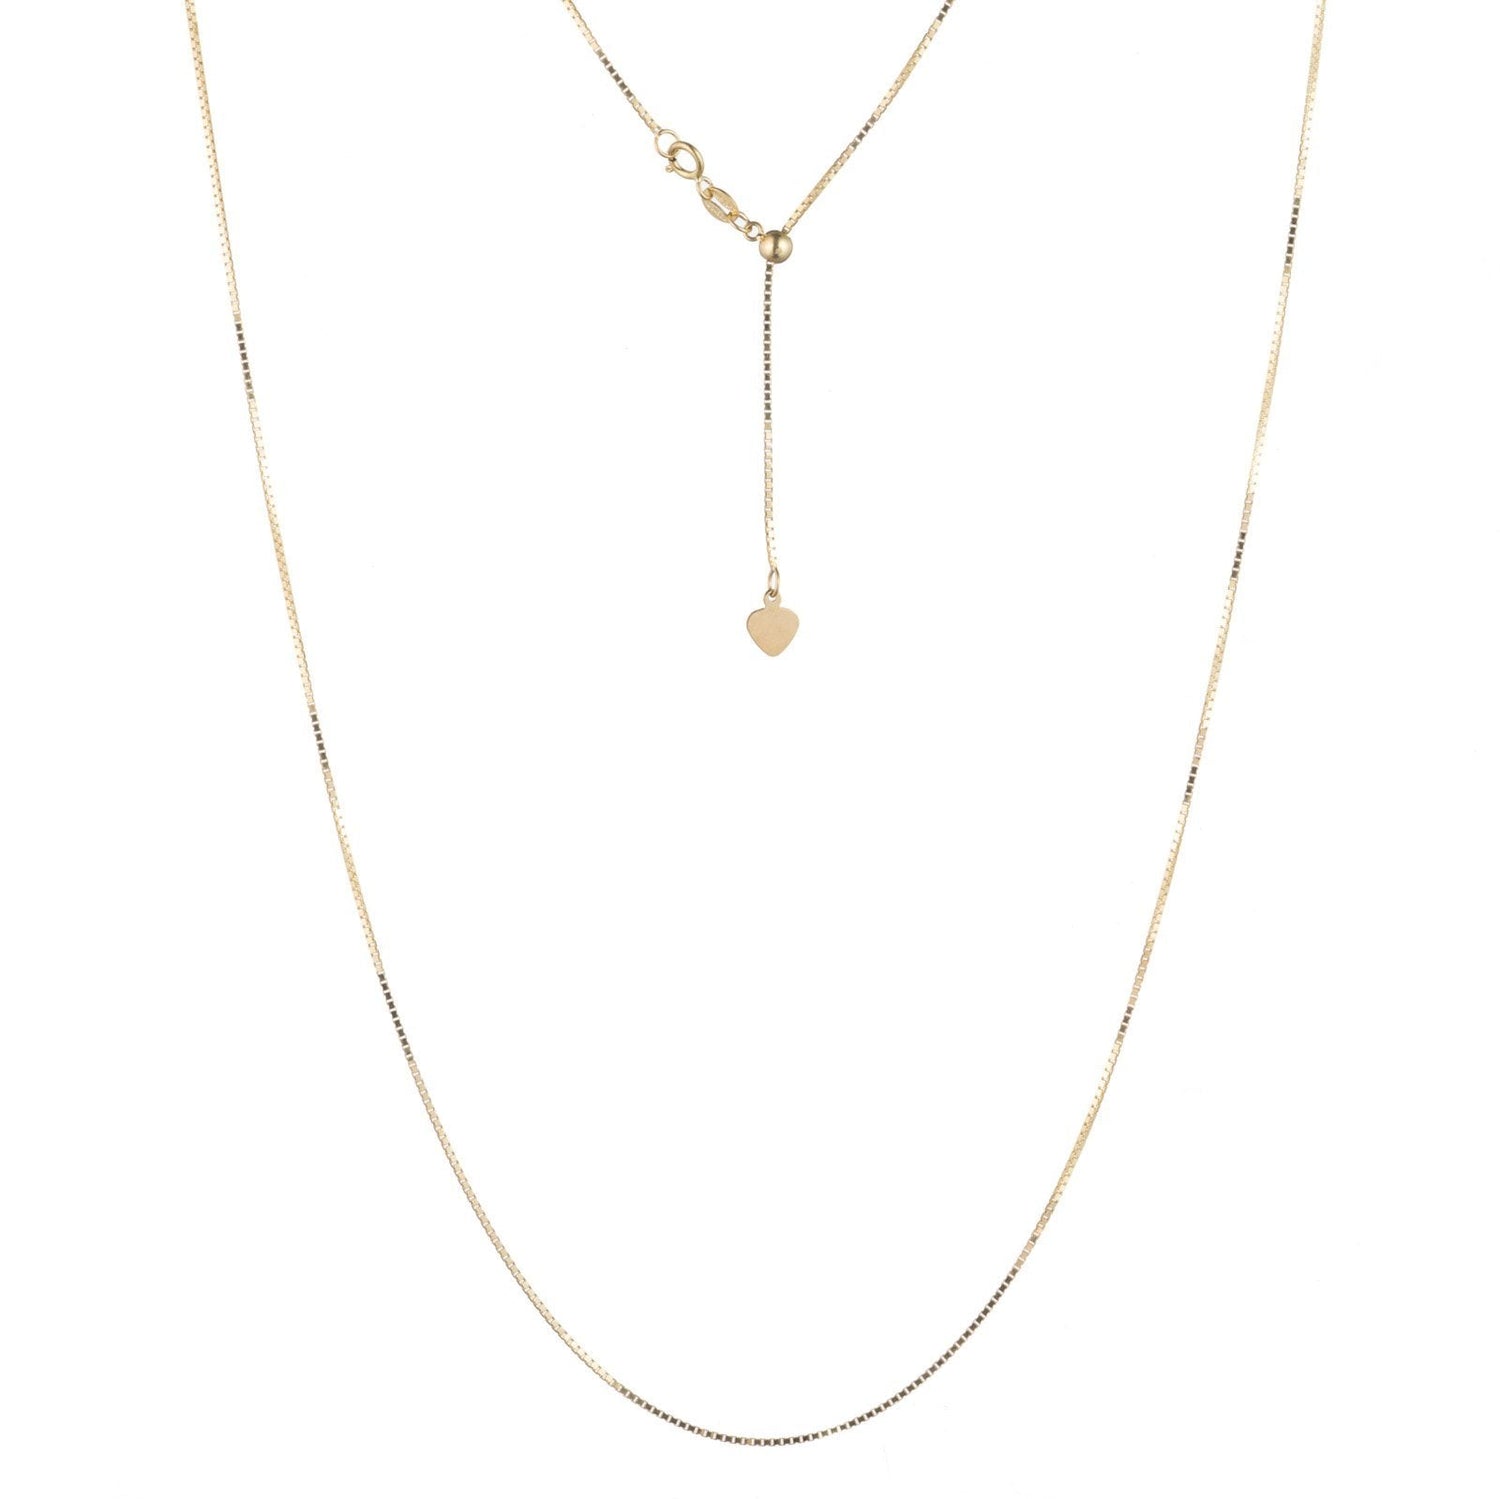 10k Fine Gold Adjustable Box Chain with Small Heart Charm, 24 inch